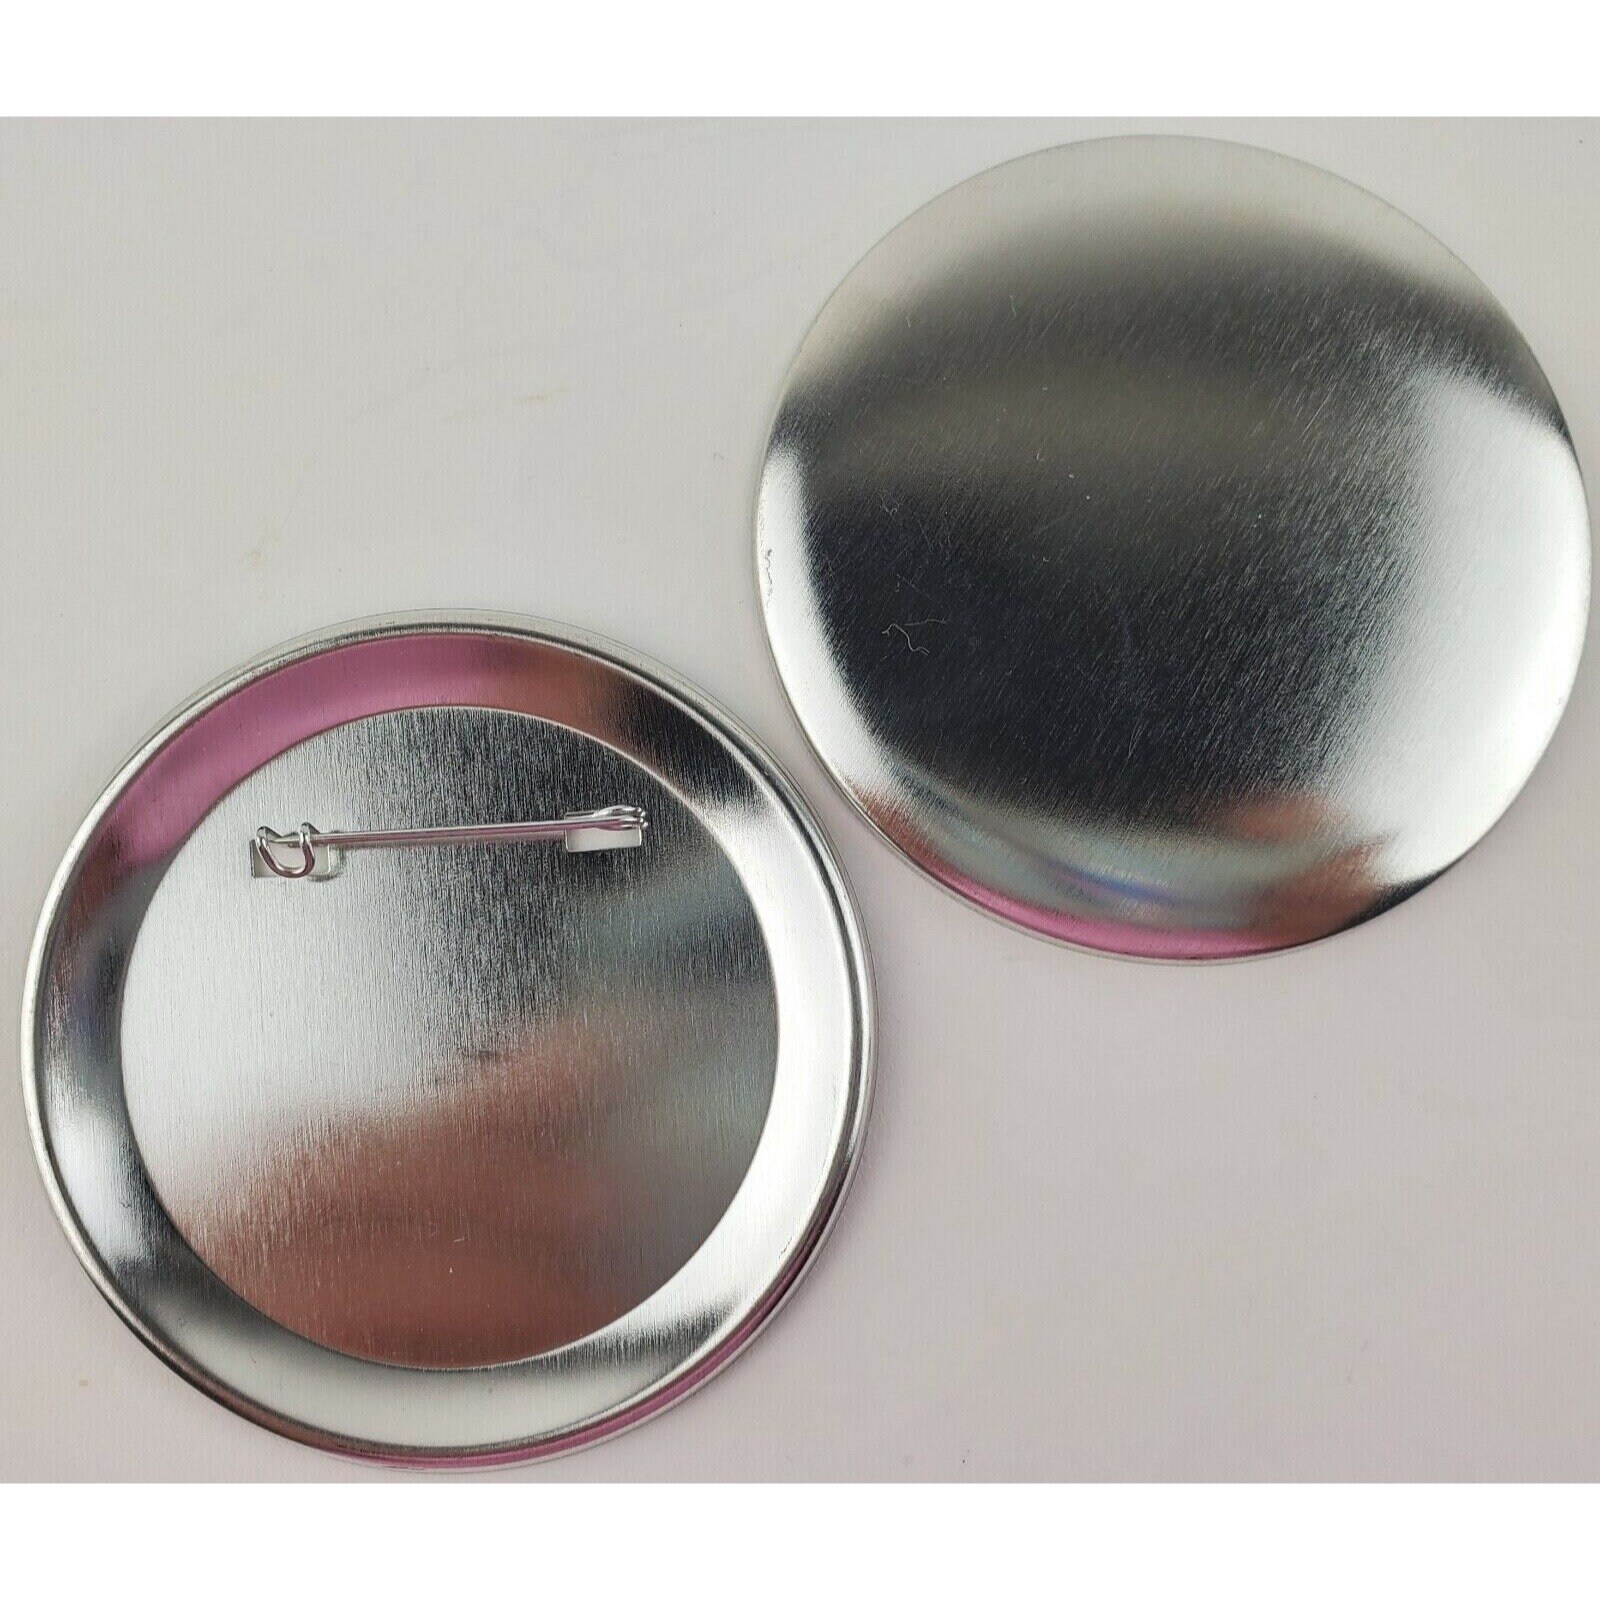 Blank Sublimation Buttons unisub W/adhesive Bar Pin 